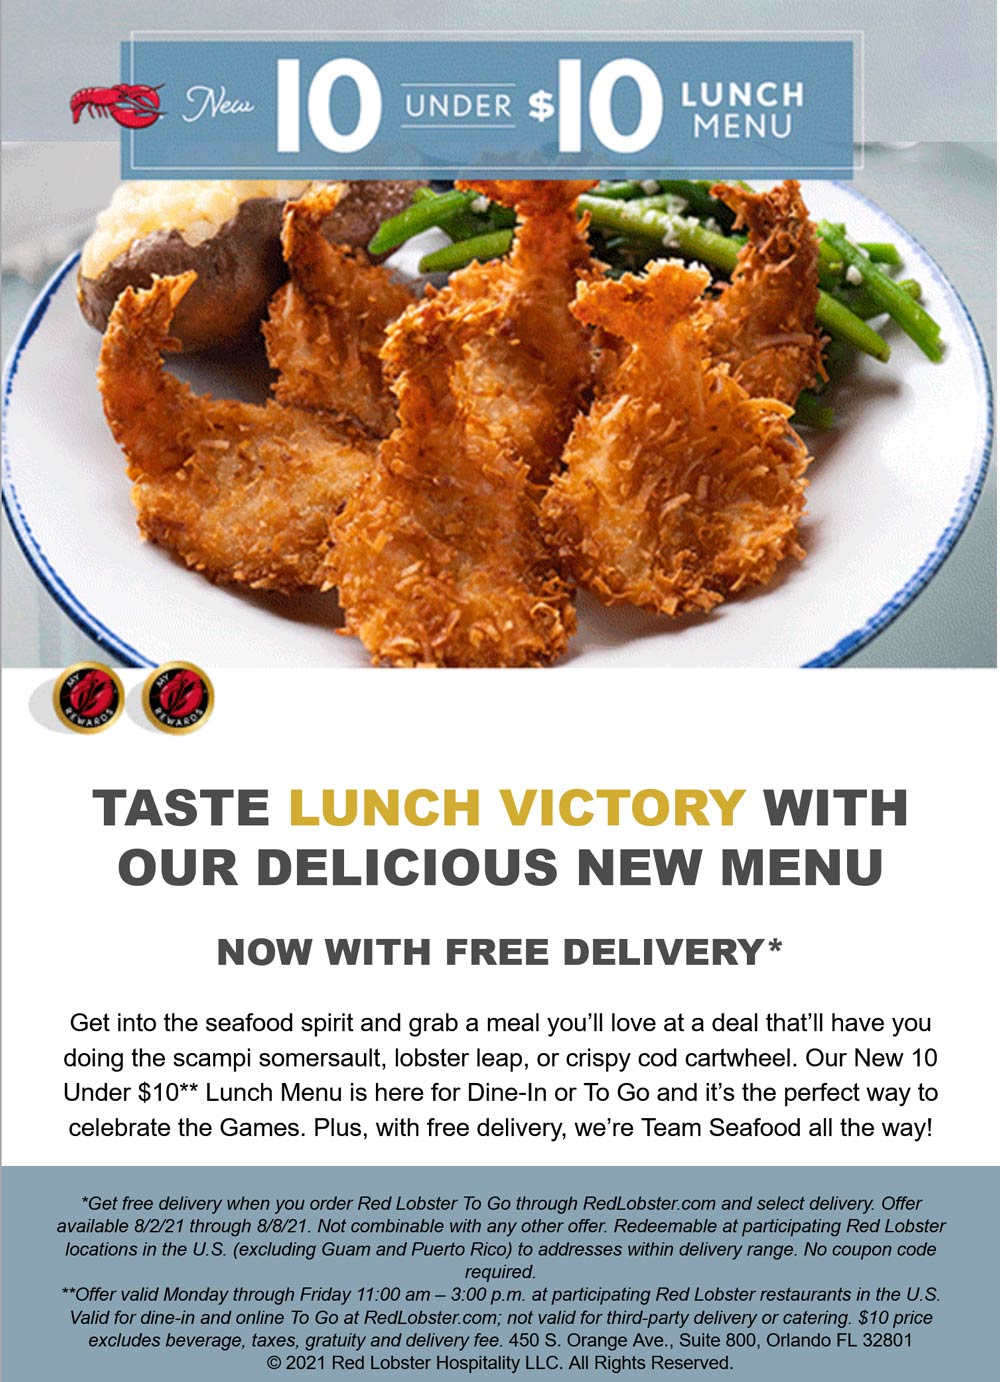 Red Lobster restaurants Coupon  10 lunch meals under $10 + free delivery at Red Lobster #redlobster 